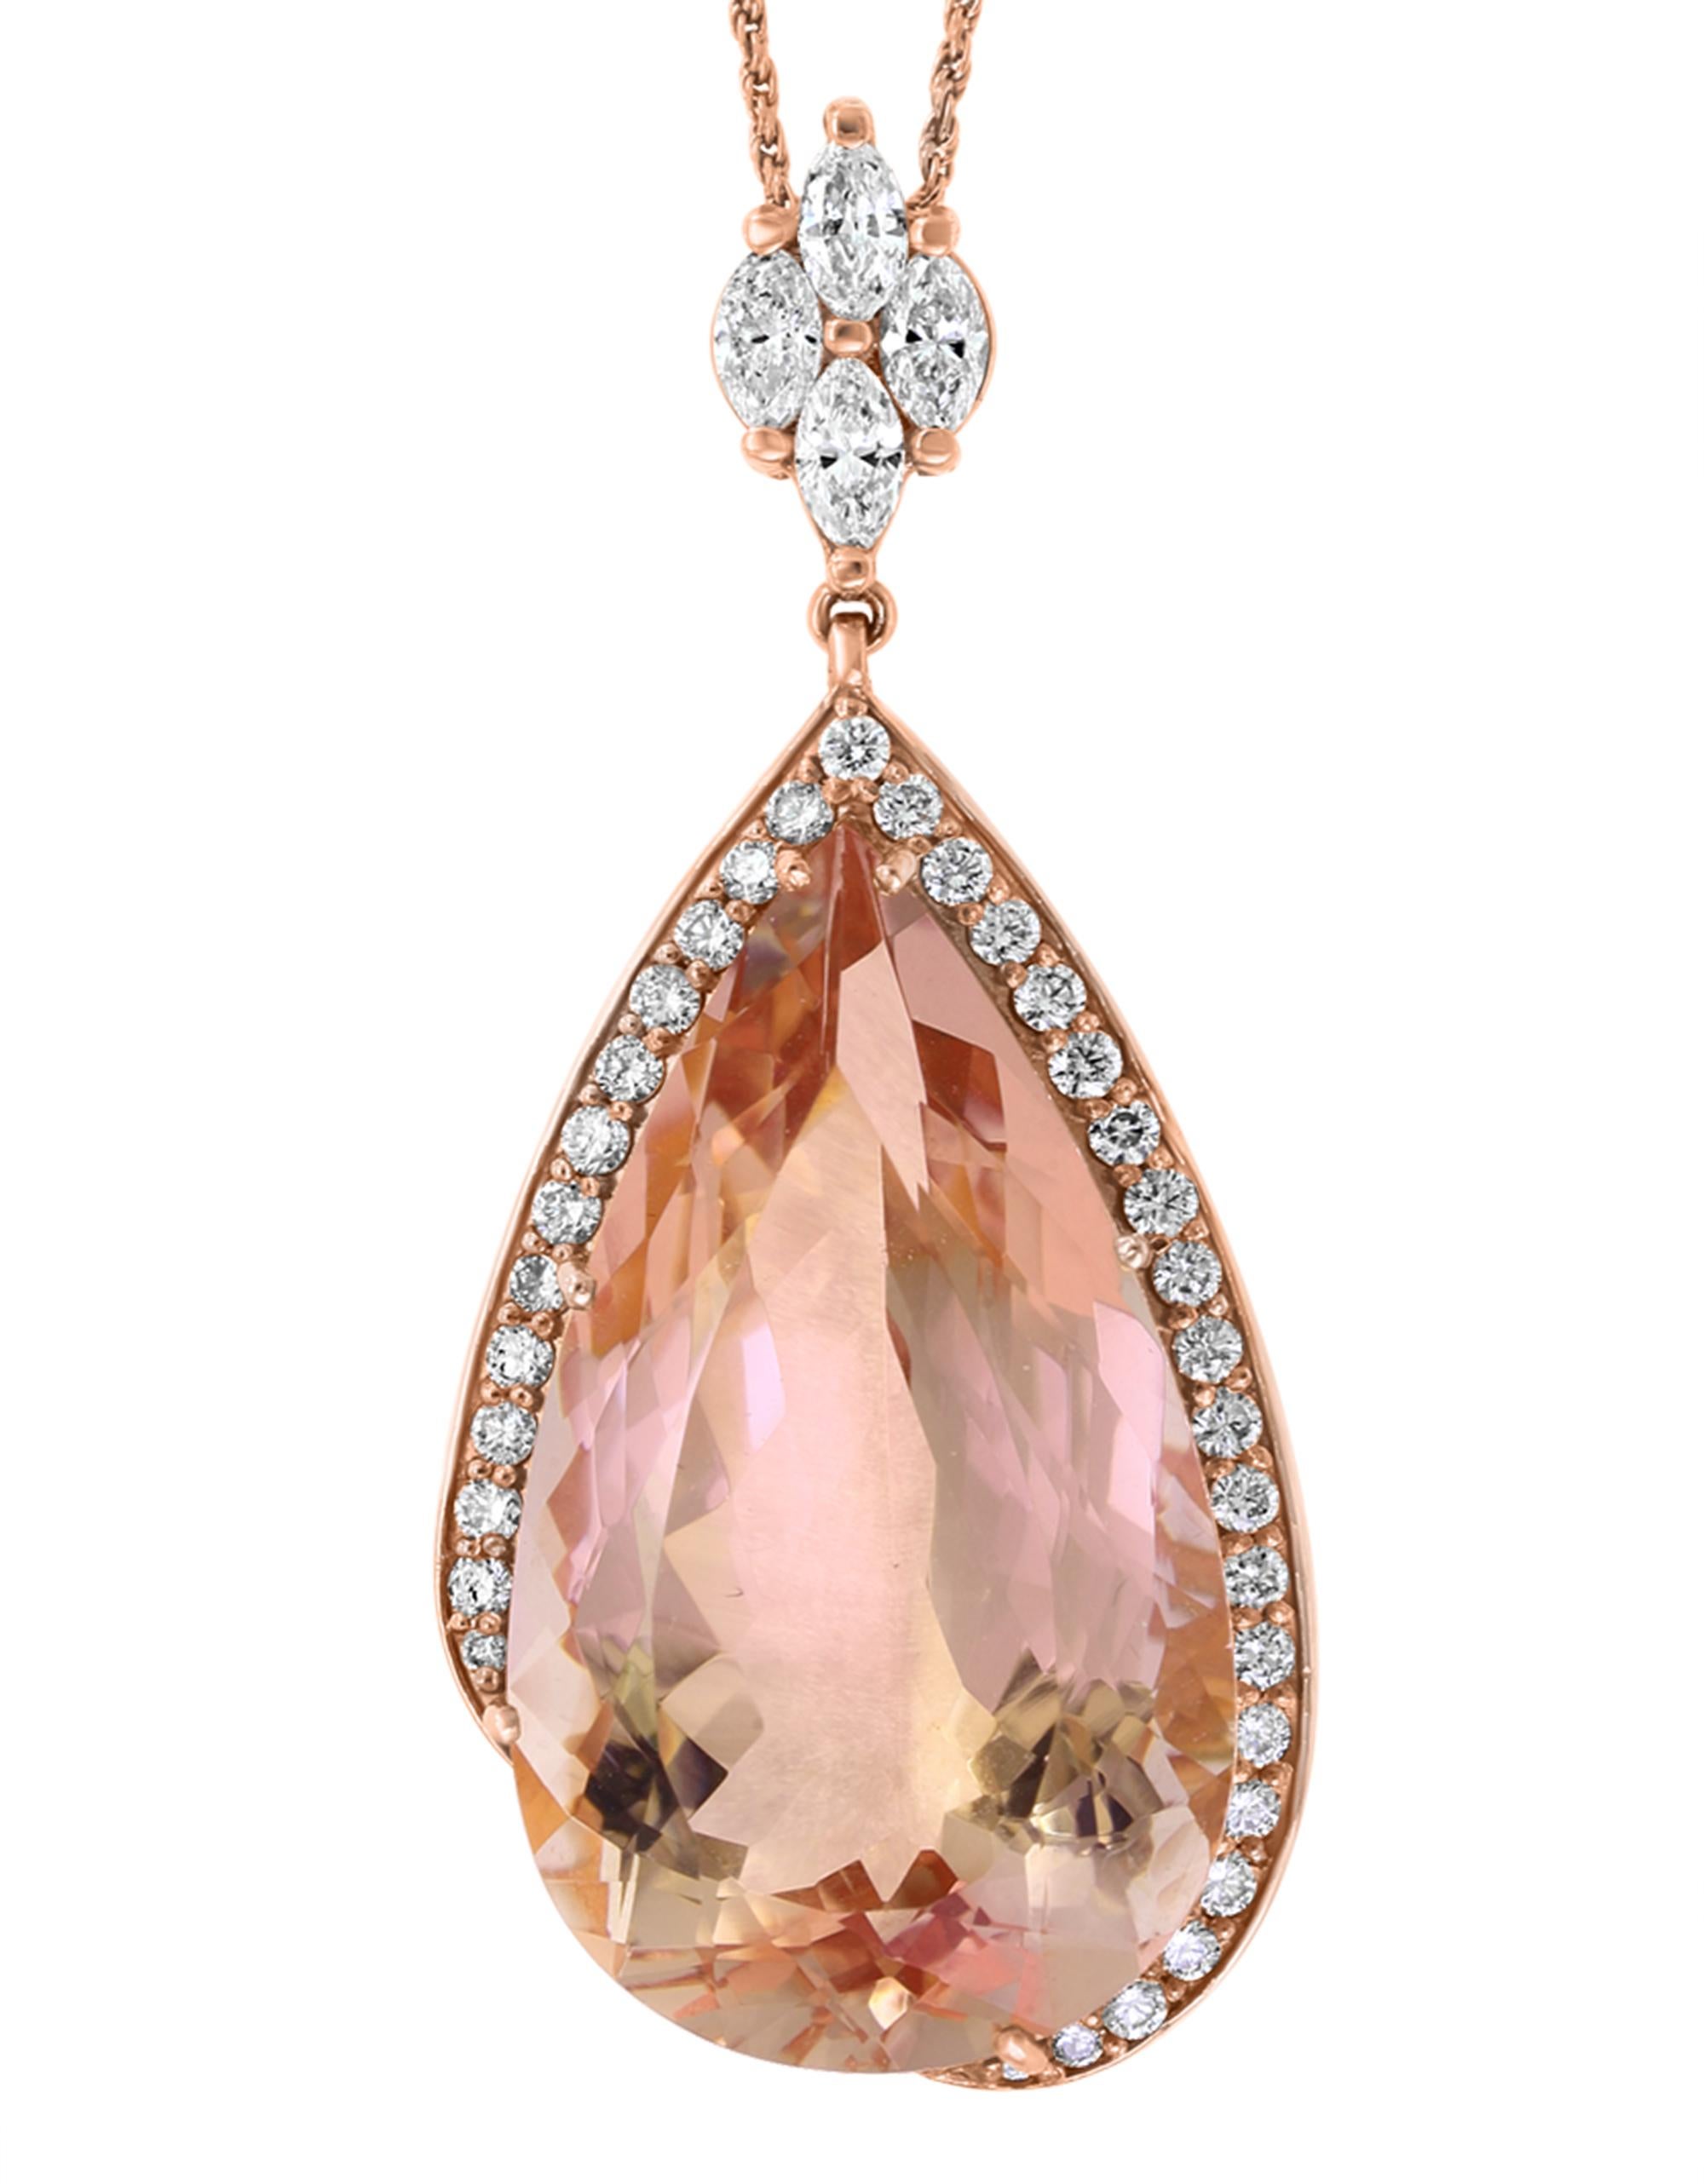 200 Carat Natural Morganite and Diamond Cocktail Earring and Pendant Set 18K PG For Sale 2